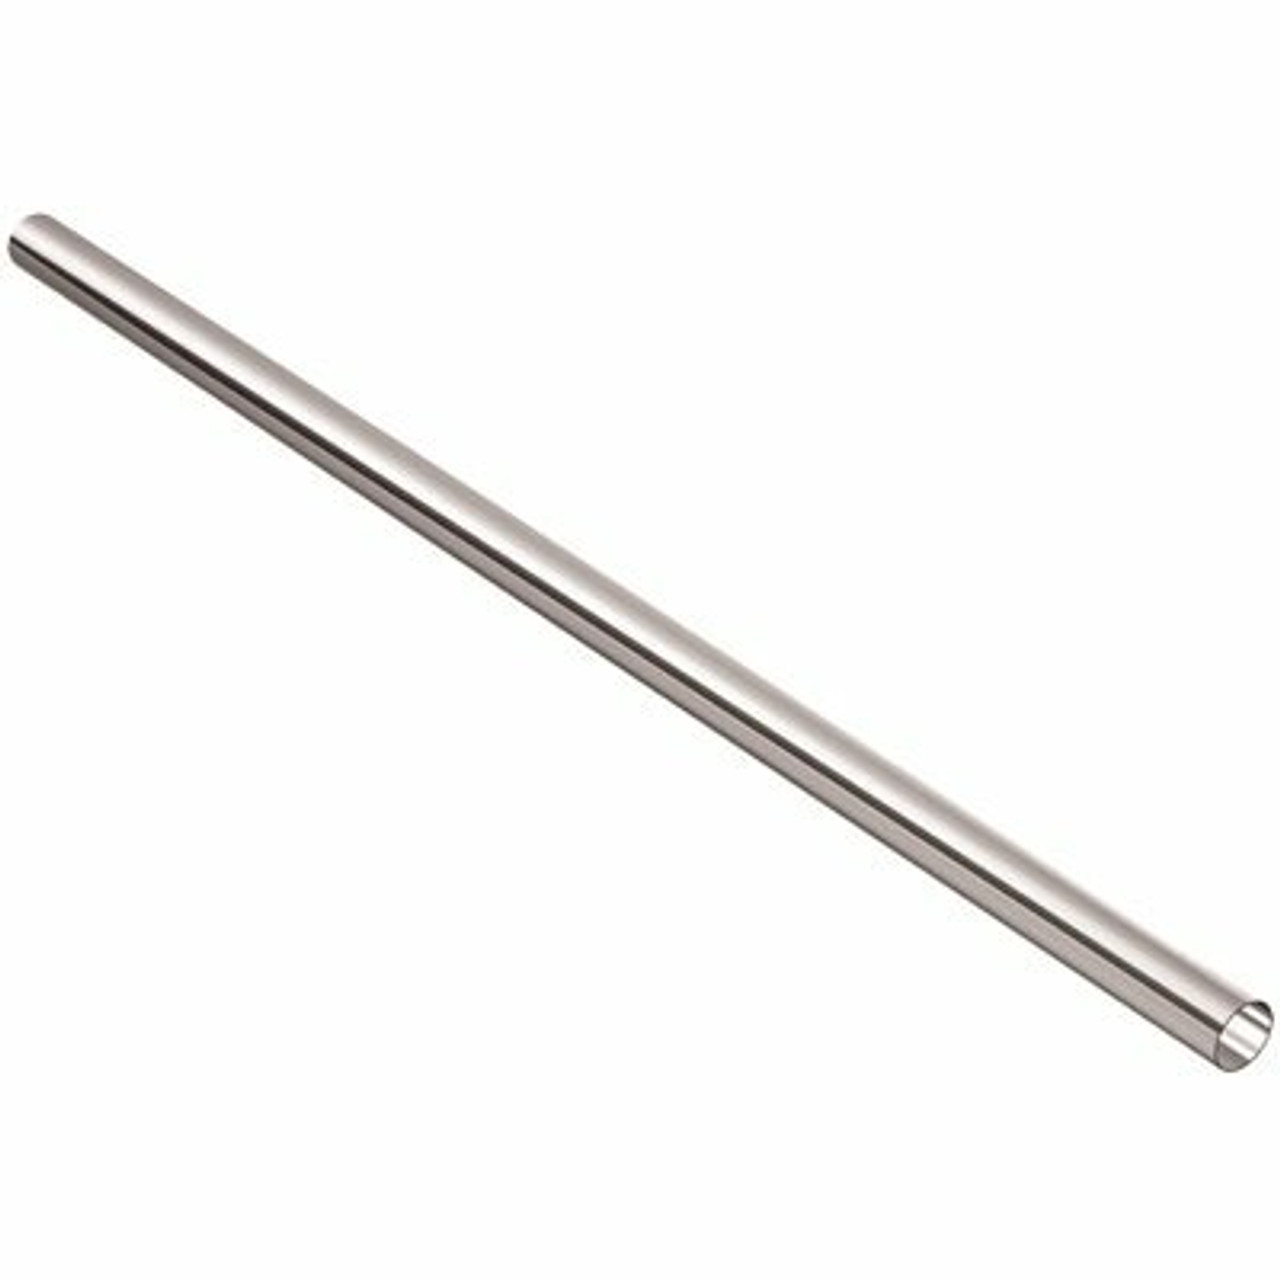 Moen Mason 24 In. Replacement Towel Bar In Chrome